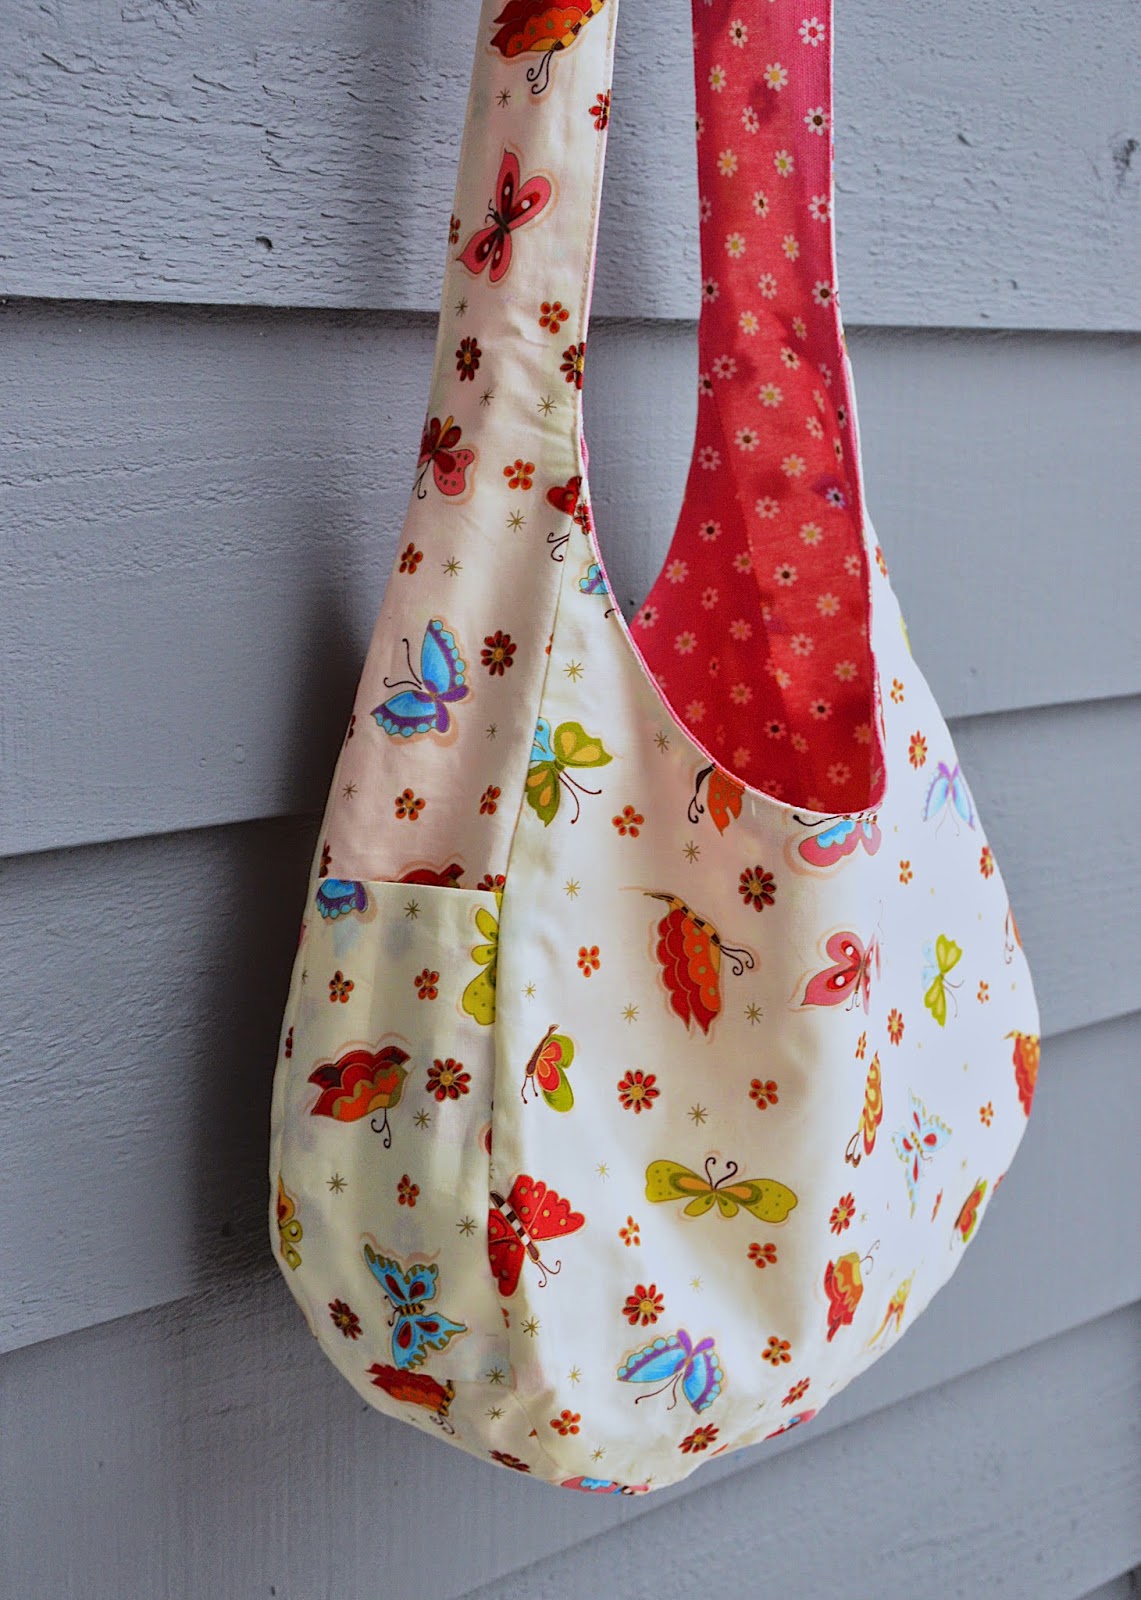 Slouchy bag pattern and tutorial download